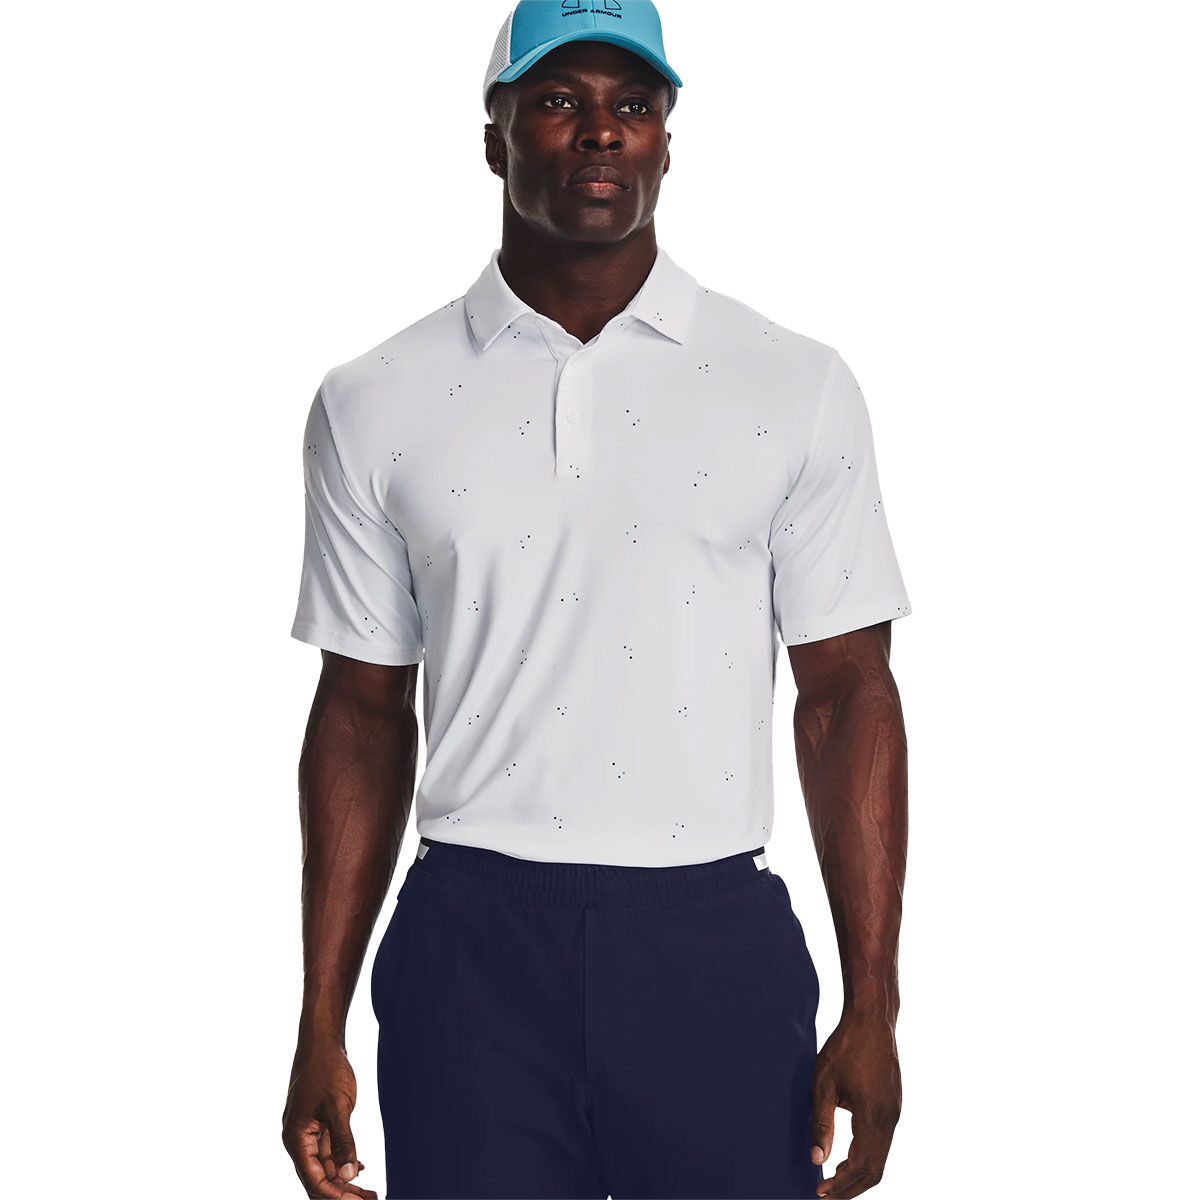 Under Armour Mens White and Blue Playoff 3.0 Printed Golf Polo Shirt, Size: Large | American Golf